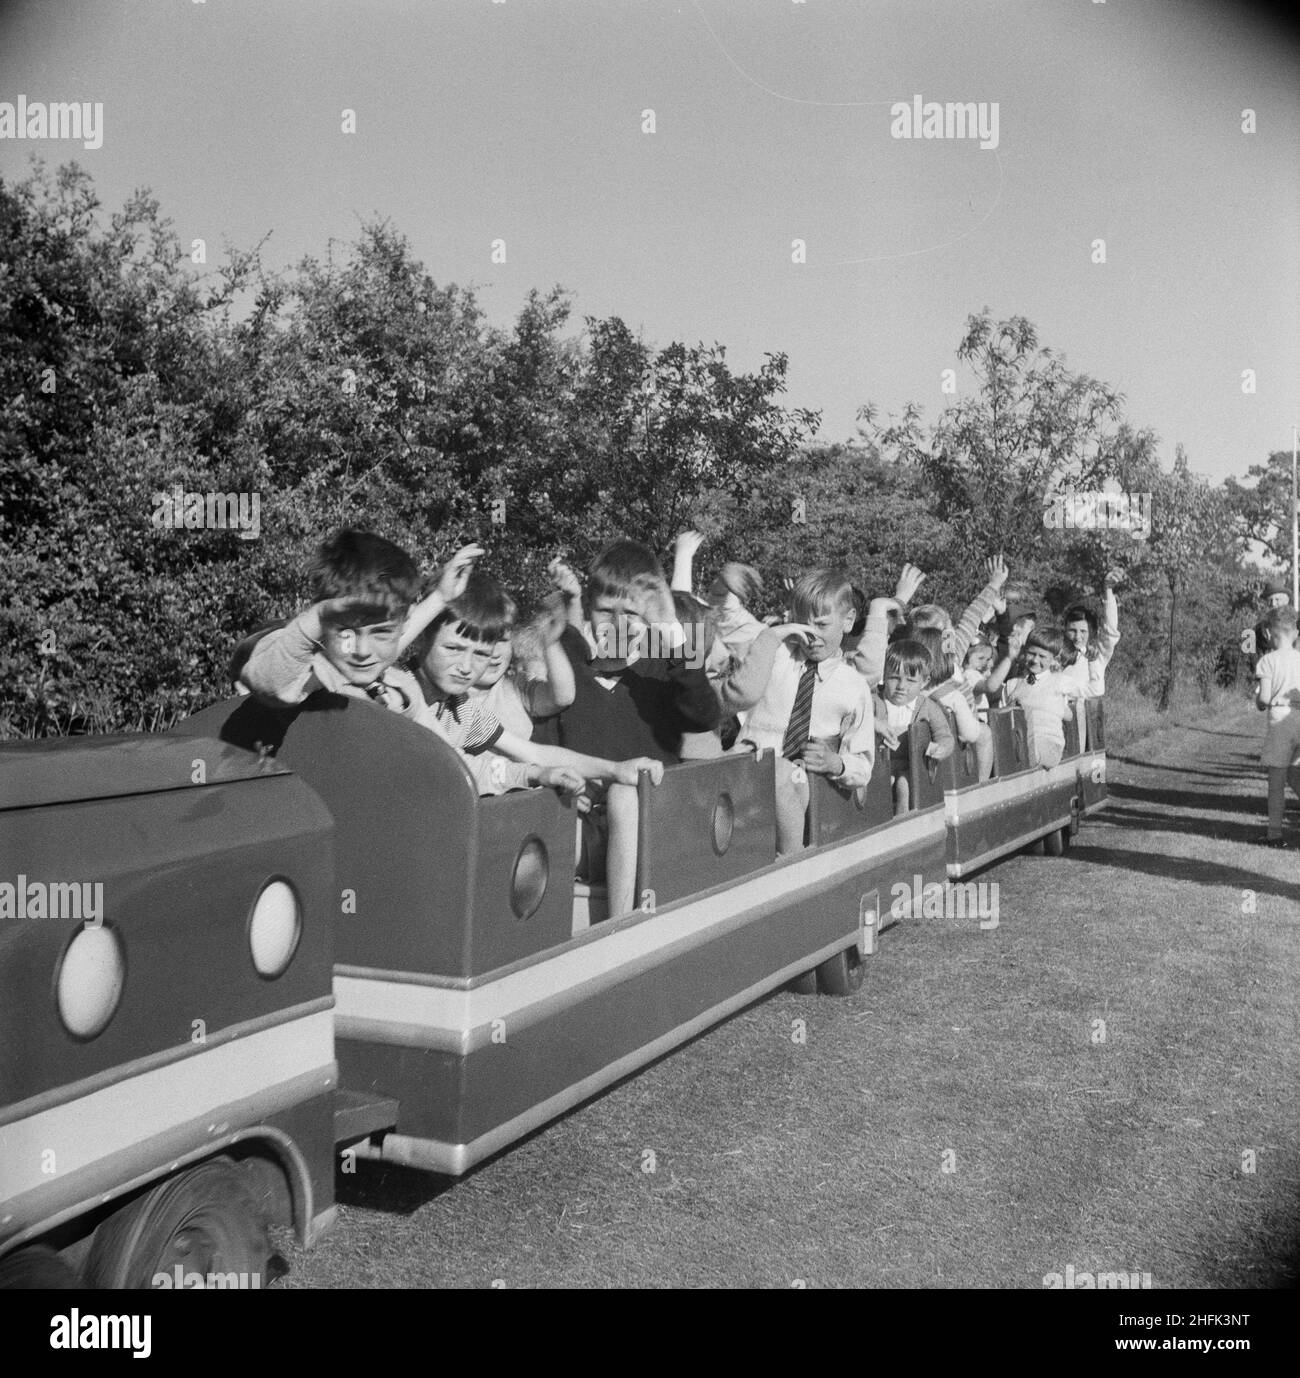 Laing Sports Ground, Rowley Lane, Elstree, Barnet, London, 18/06/1955. Children riding in a miniature train carriage and waving at the camera during a Laing sports day at Elstree. This sports day was attended by people from Laing contracts in Thurleigh, Bradford, Harlow, Shell Haven, London, Welwyn Garden City, Leicester and even as far as Plymouth. The day included field and track competitions as well as special attractions including Scottish dancing, a flower show, gymnastic displays and music by the Silver Band of the 5th Hendon Company Boys' Brigade. Stock Photo